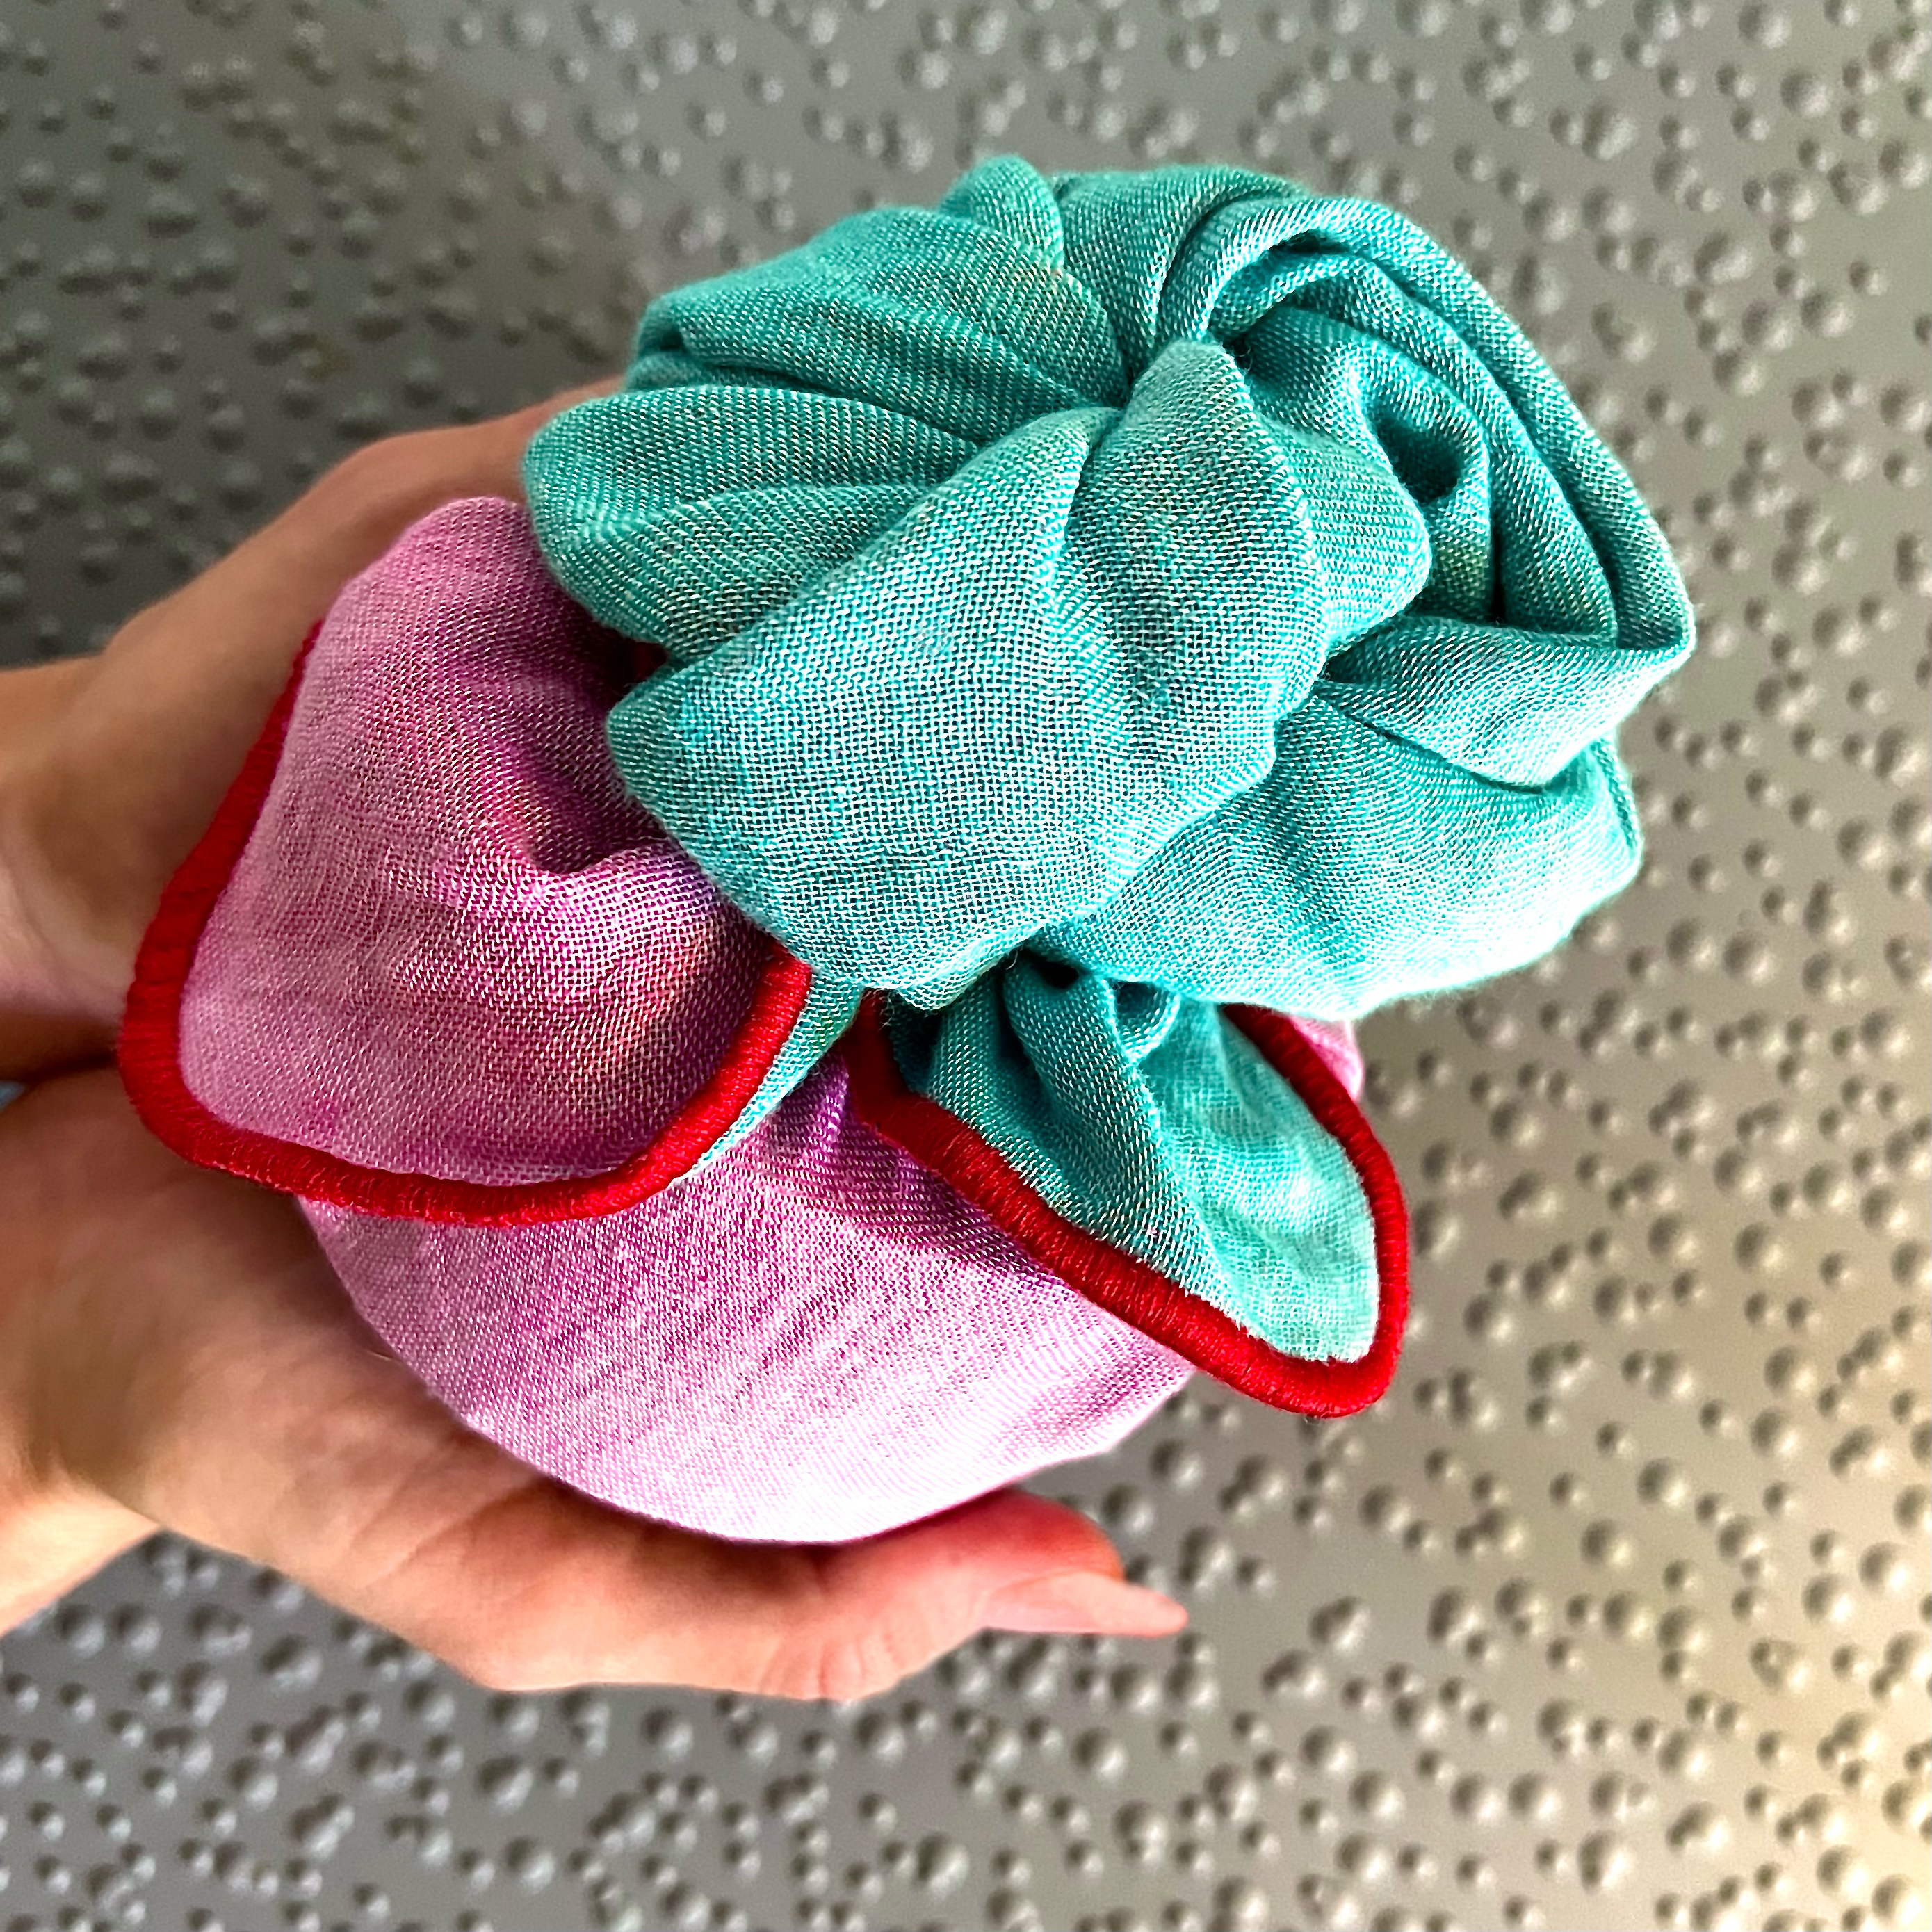 Gift artfully wrapped to resemble a rose using the 'Sparkling Reflections' reusable fabric gift wrap from COVER, showcasing vibrant shades of pink and turquoise in a flower fold. The beautifully wrapped gift is delicately held by two hands against a muted grey background.